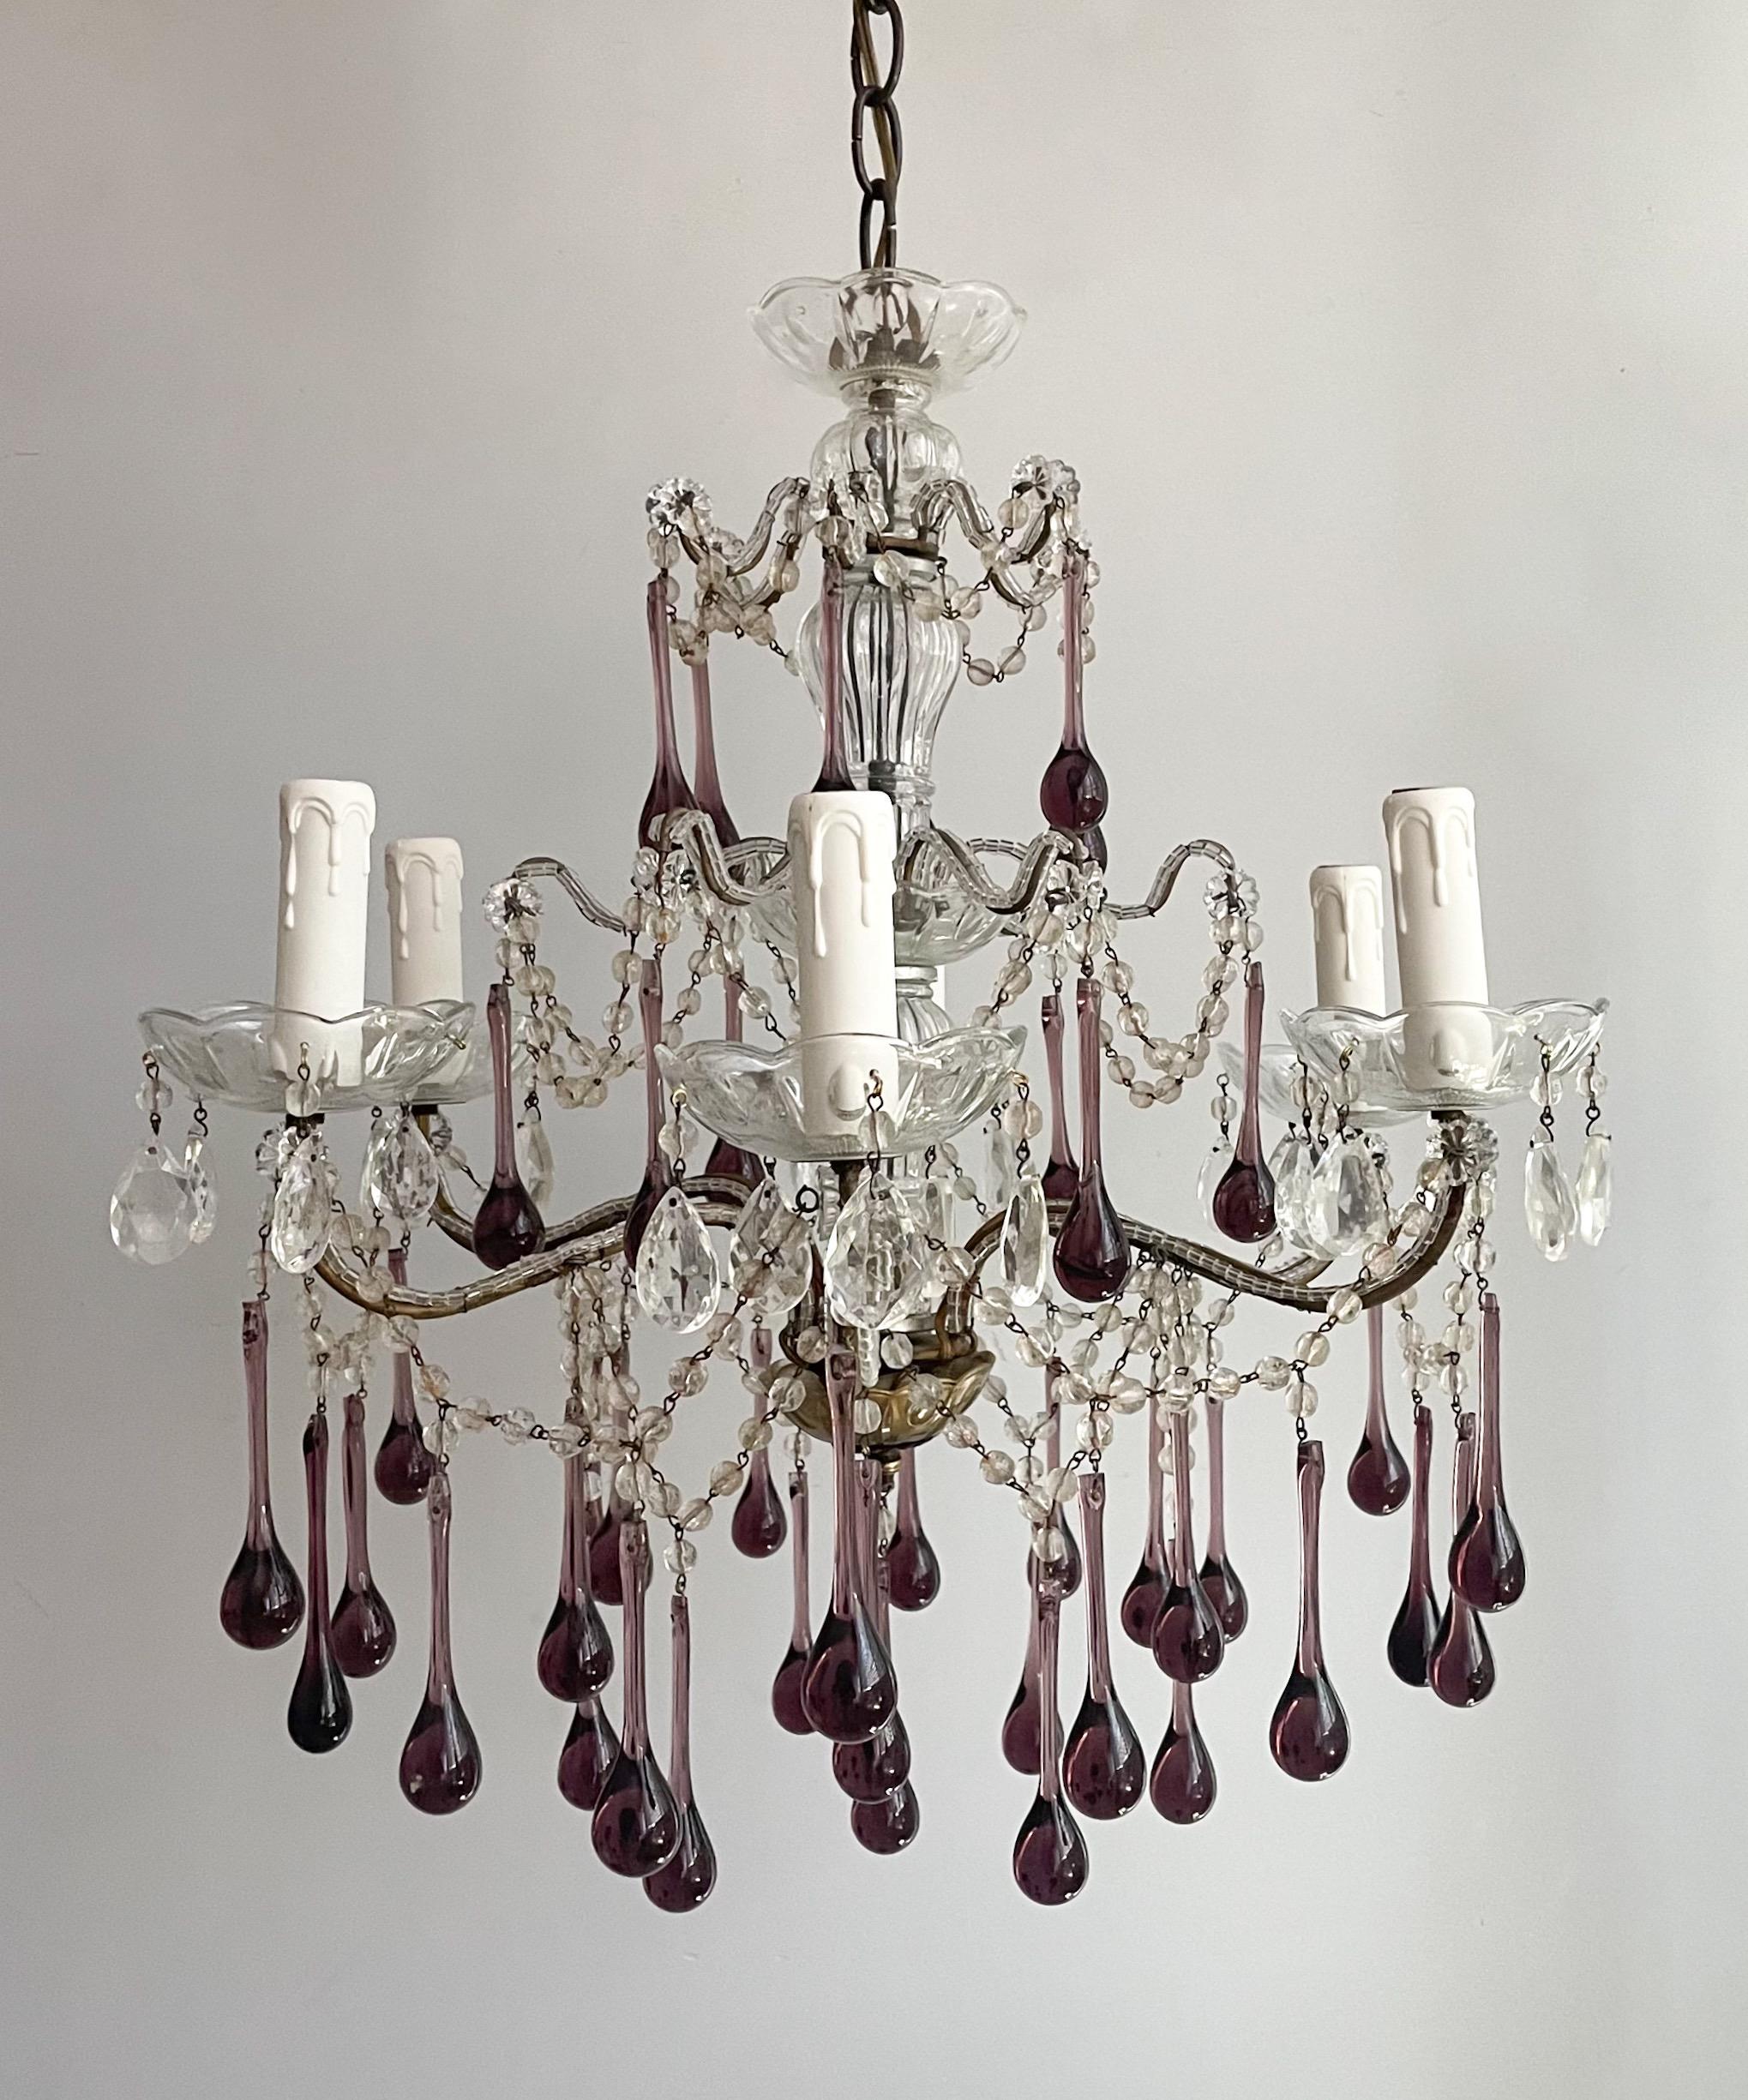 Beautiful, Italian 1960s crystal beaded chandelier with Murano glass drops.

The chandelier features a glass beaded iron frame with a fluted crystal column at its center and long Murano glass ball drops in a rich amethyst hue.

The chandelier is